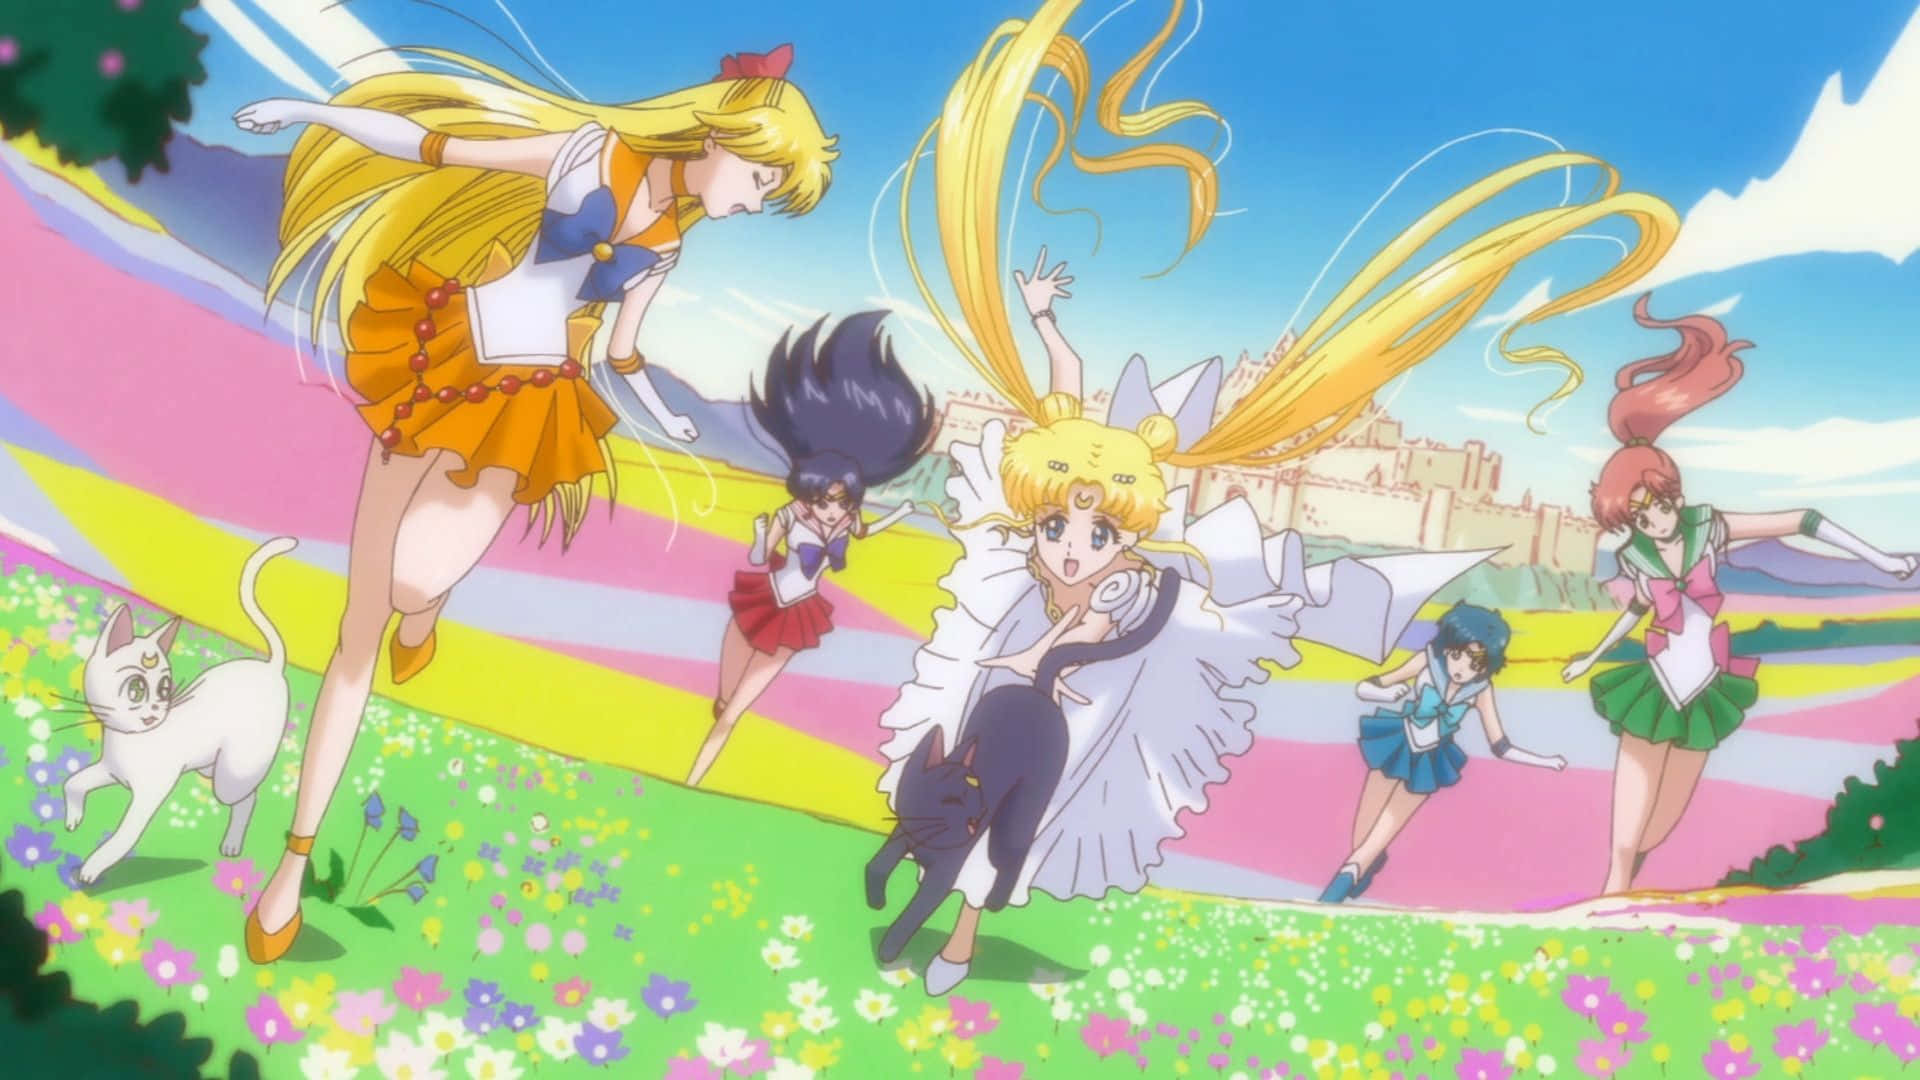 Celebrate the power of hope and courage with Sailor Moon!